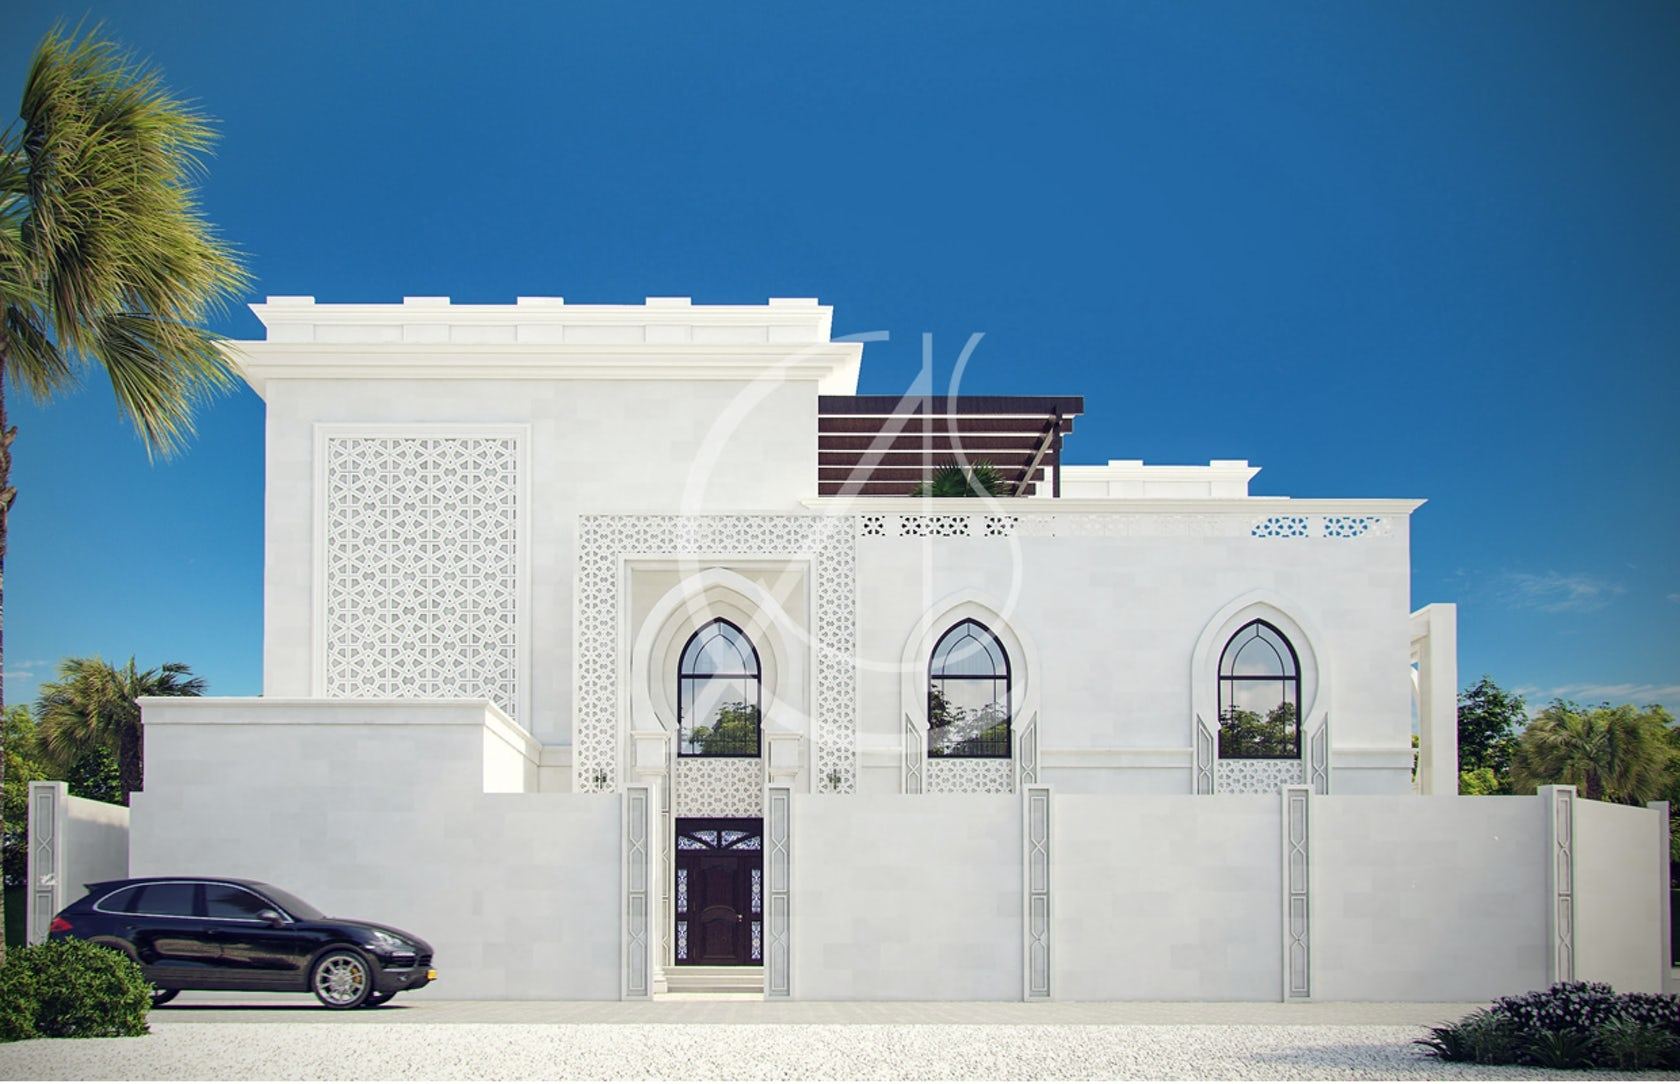 In this traditional Arabic house design, in KSA,the impact of Islamic  architecture is very evident in the use of #traditional forms & features